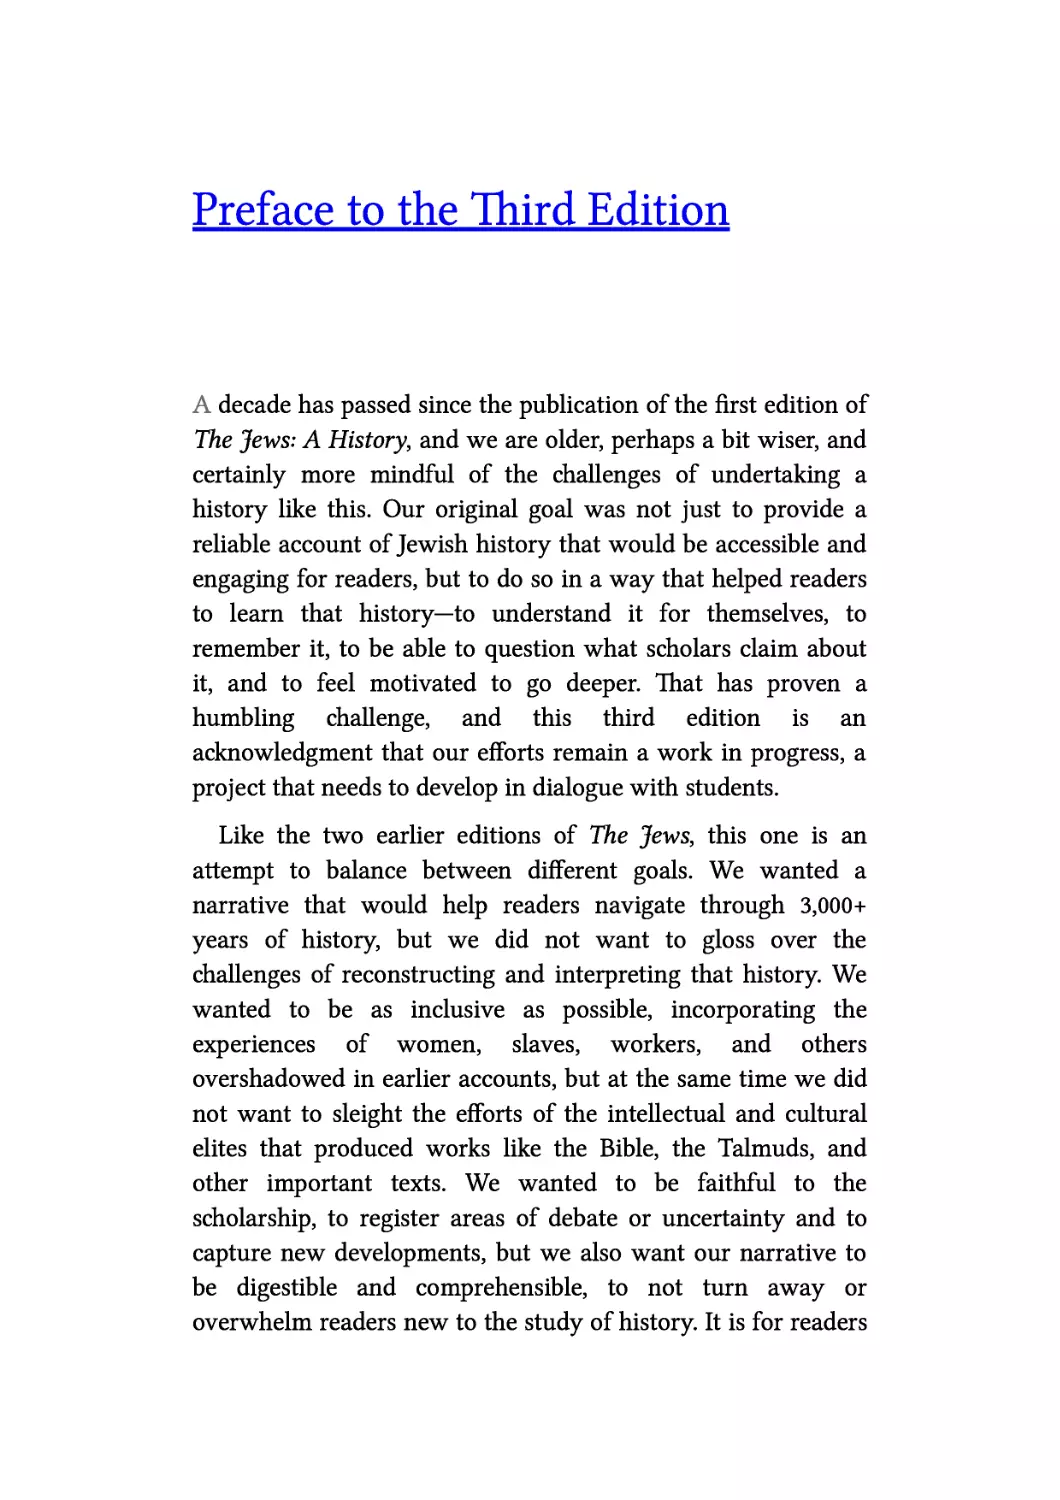 Preface to the Third Edition